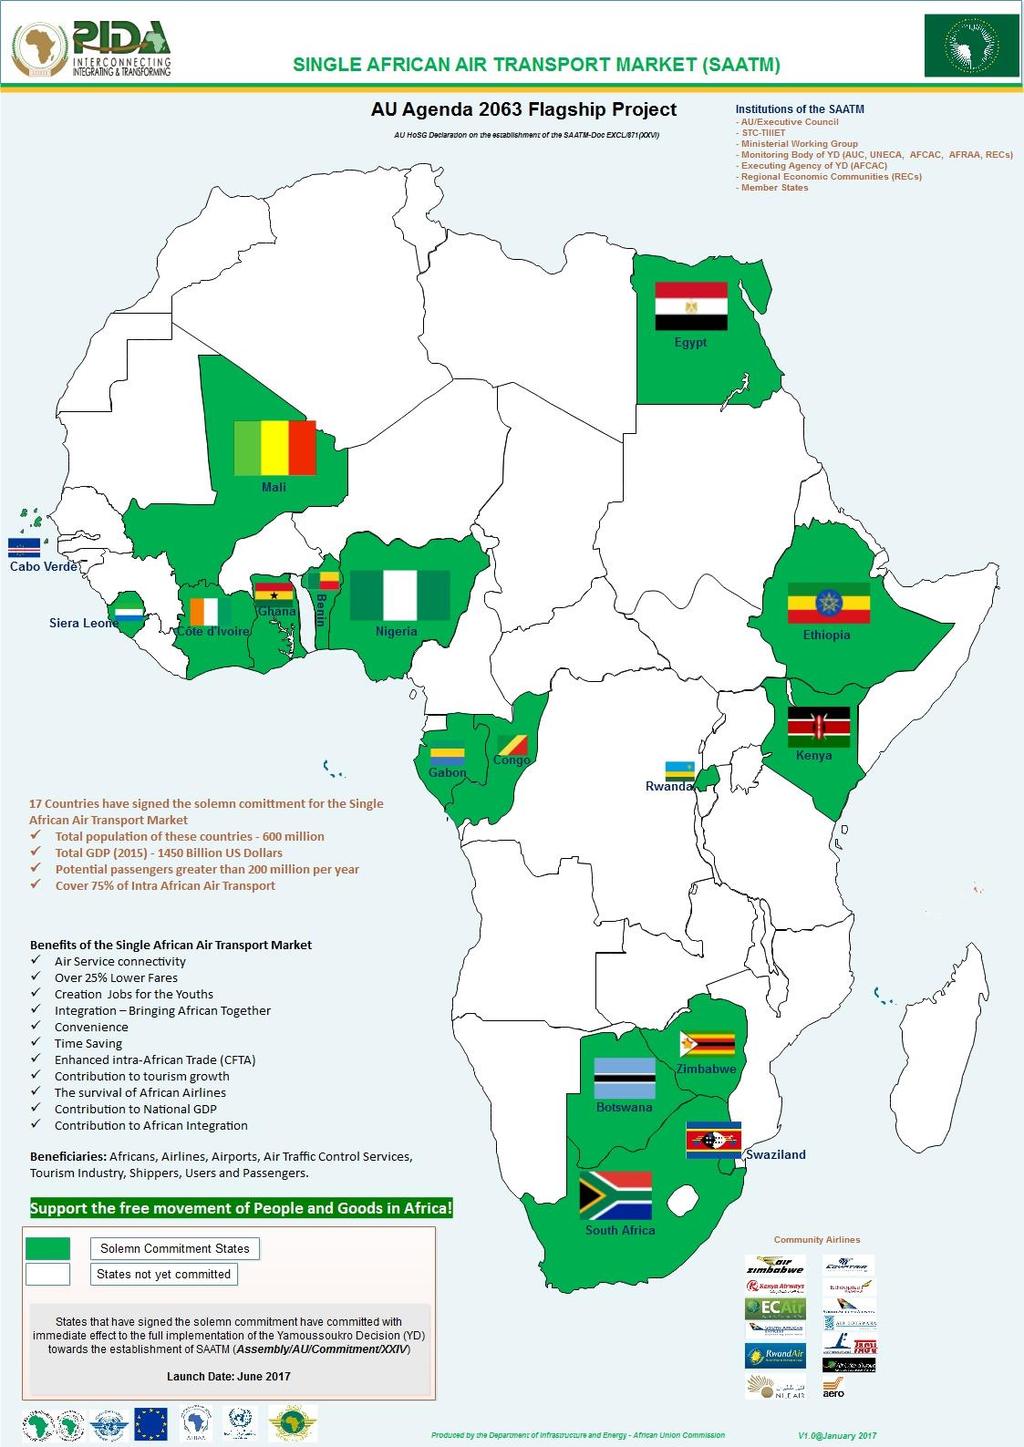 The Single African Air Transport Market - An Agenda 2063 Flagship Project - Liberalising intra-african air transport through the full implementation of the Yamoussoukro Decision, to improve air